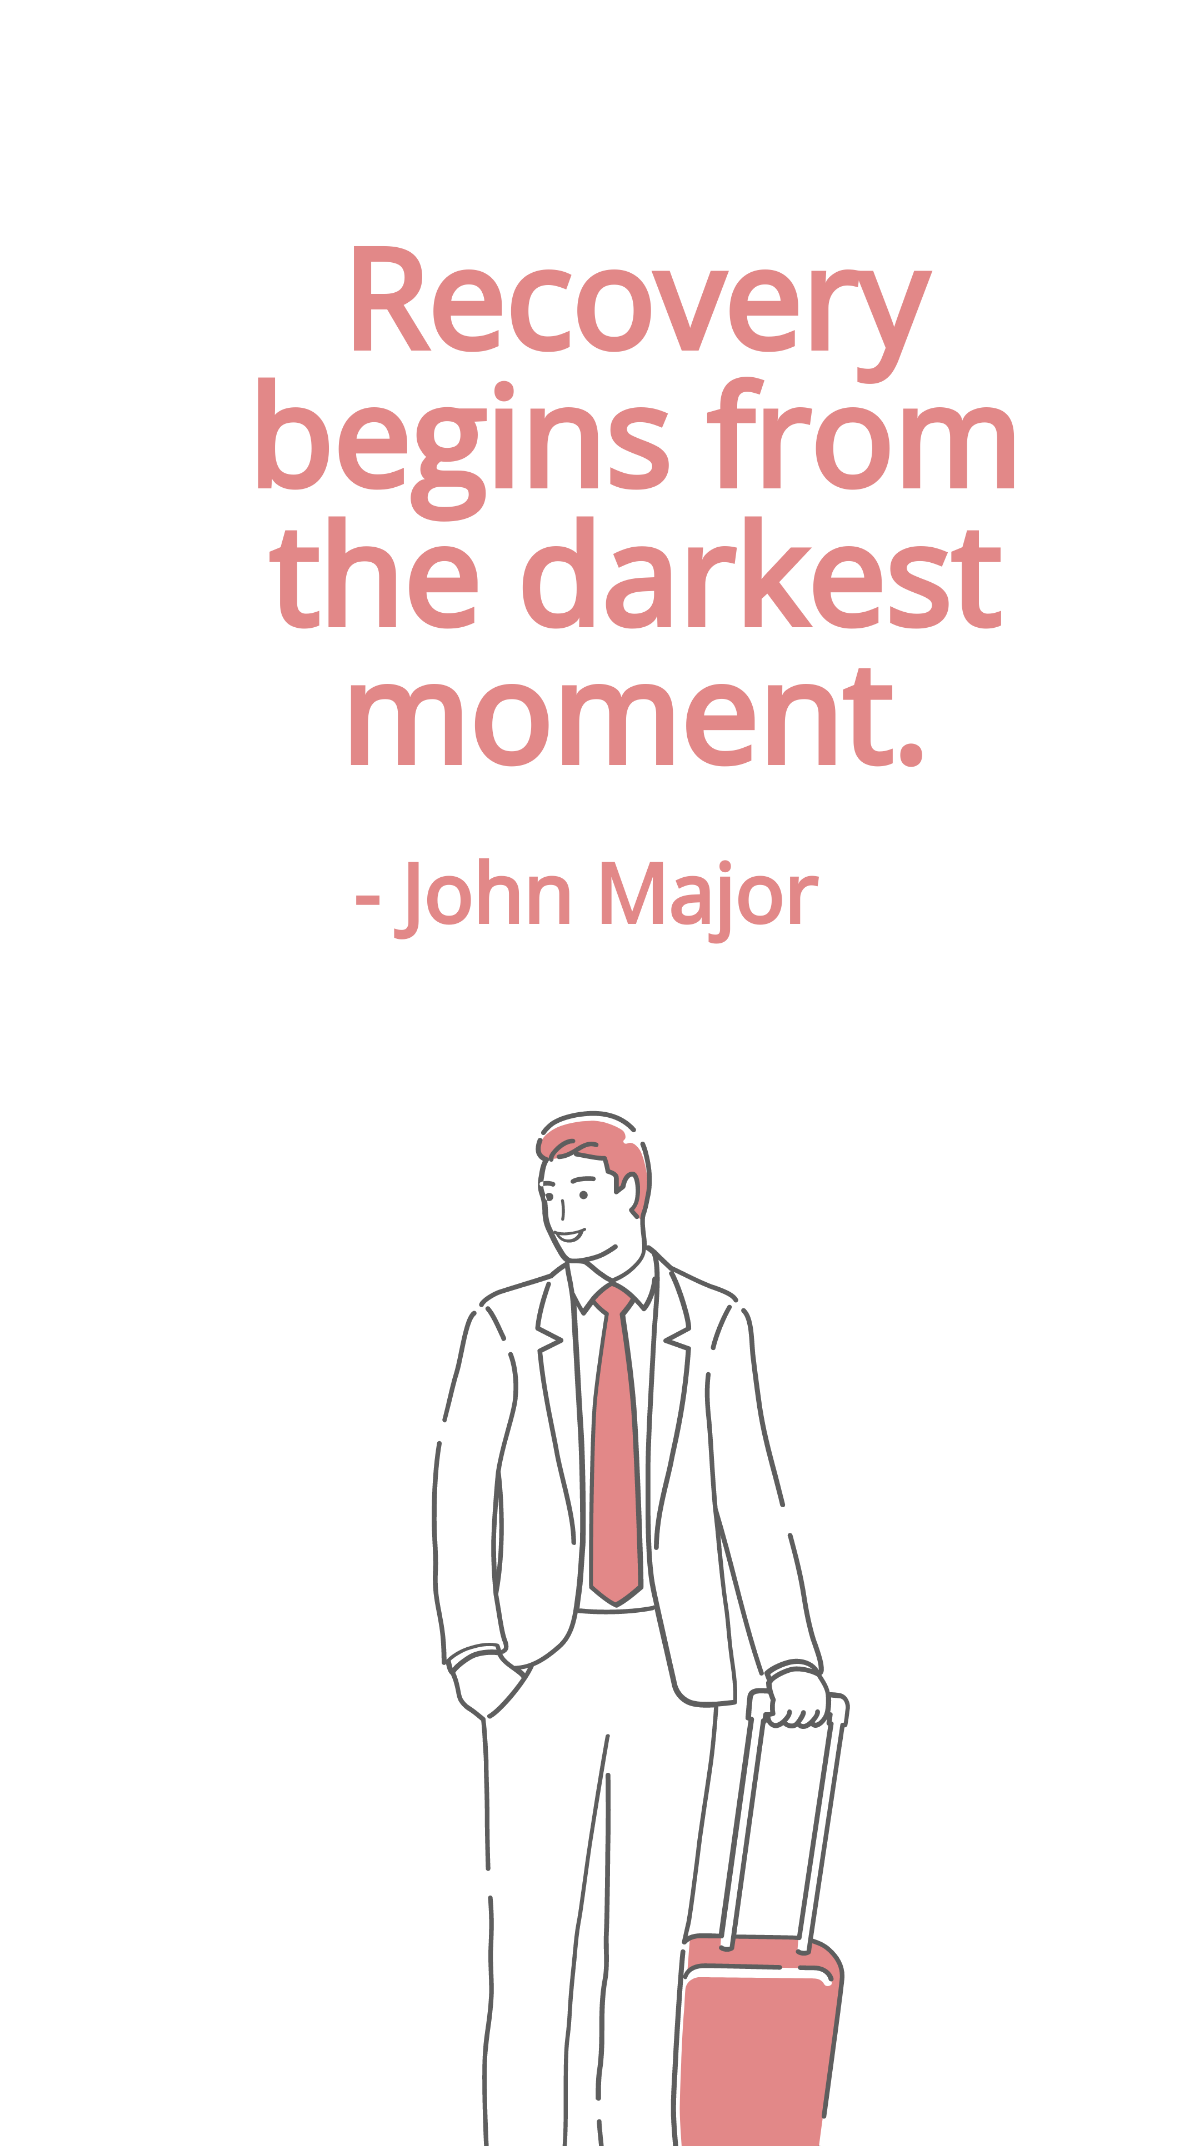 John Major - Recovery begins from the darkest moment. Template